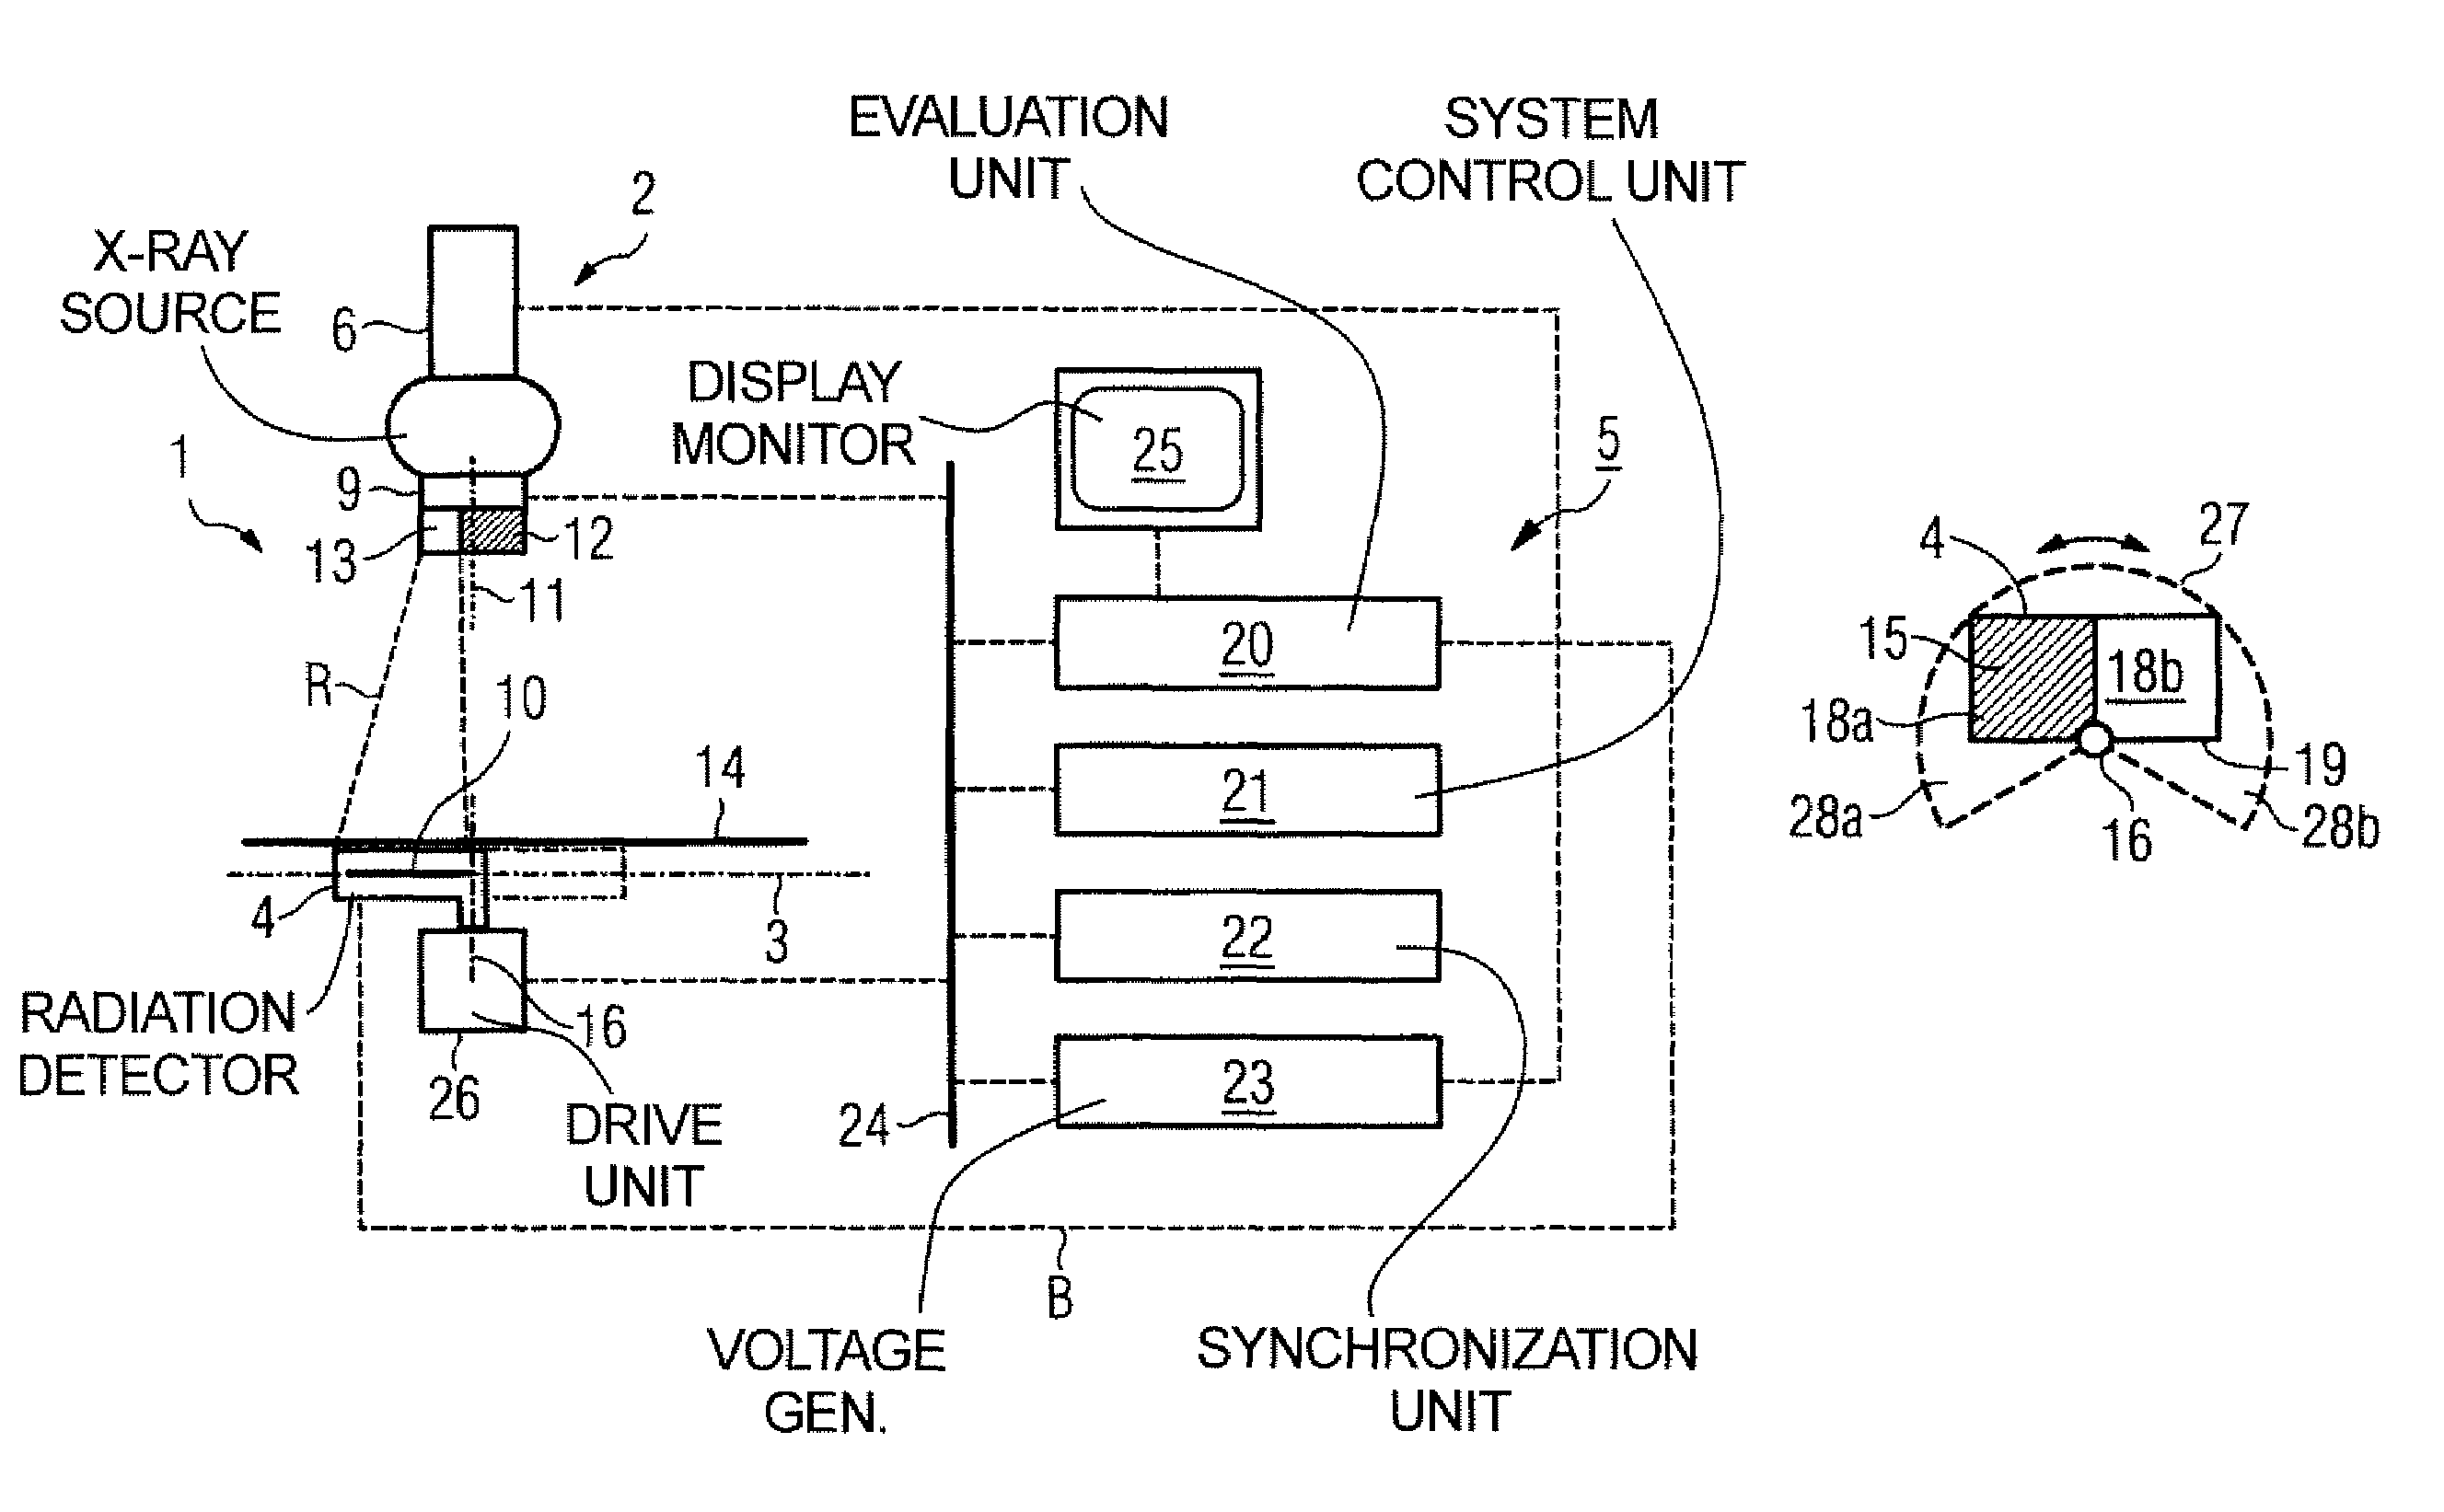 X-ray imaging apparatus with continuous, periodic movement of the radiation detector in the exposure plane